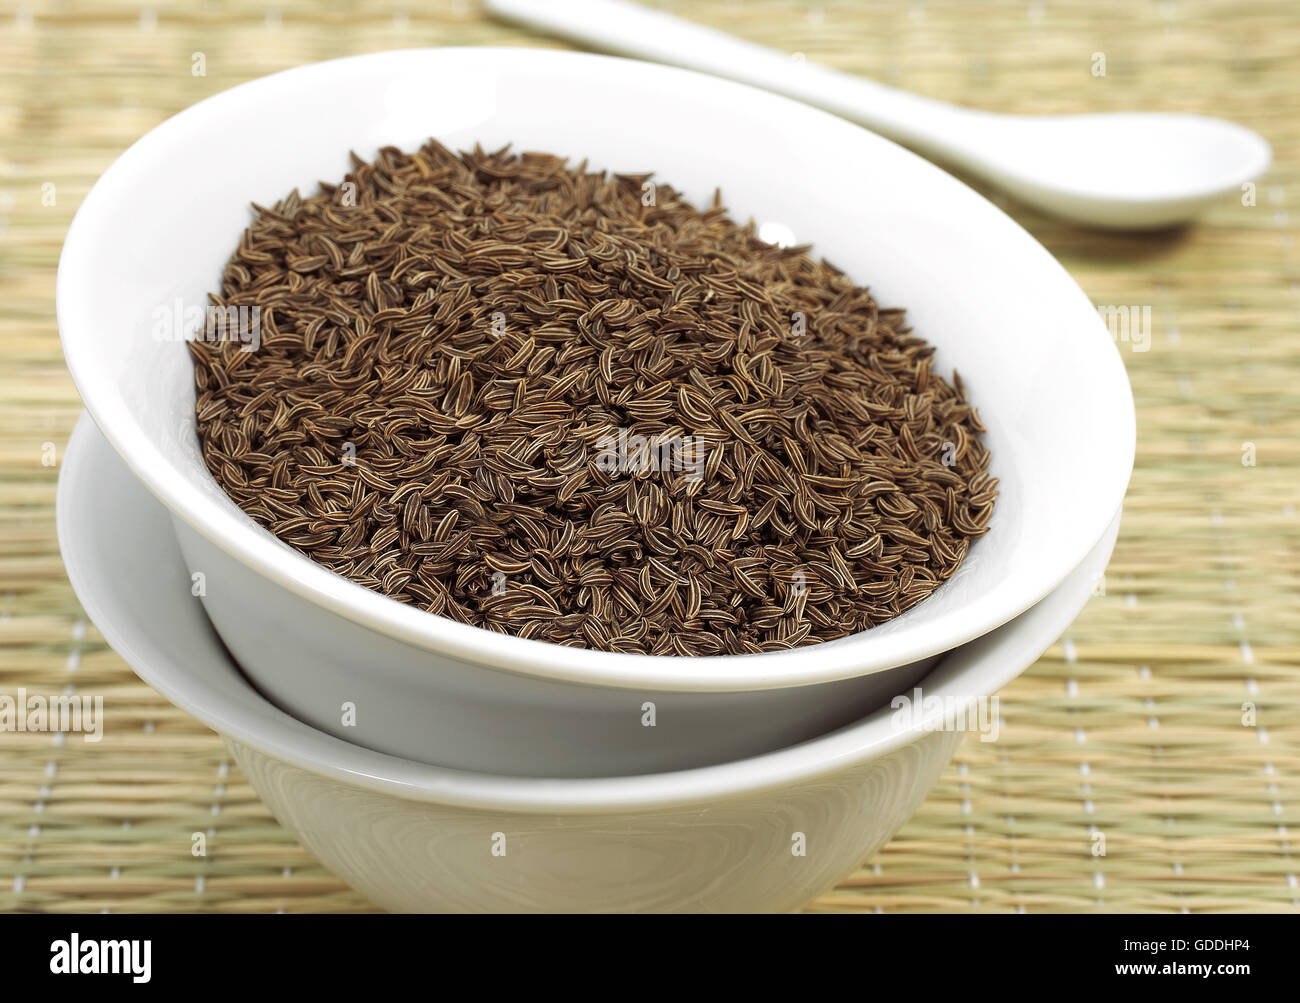 Caraway, carum carvi, Seeds in Bowl Stock Photo